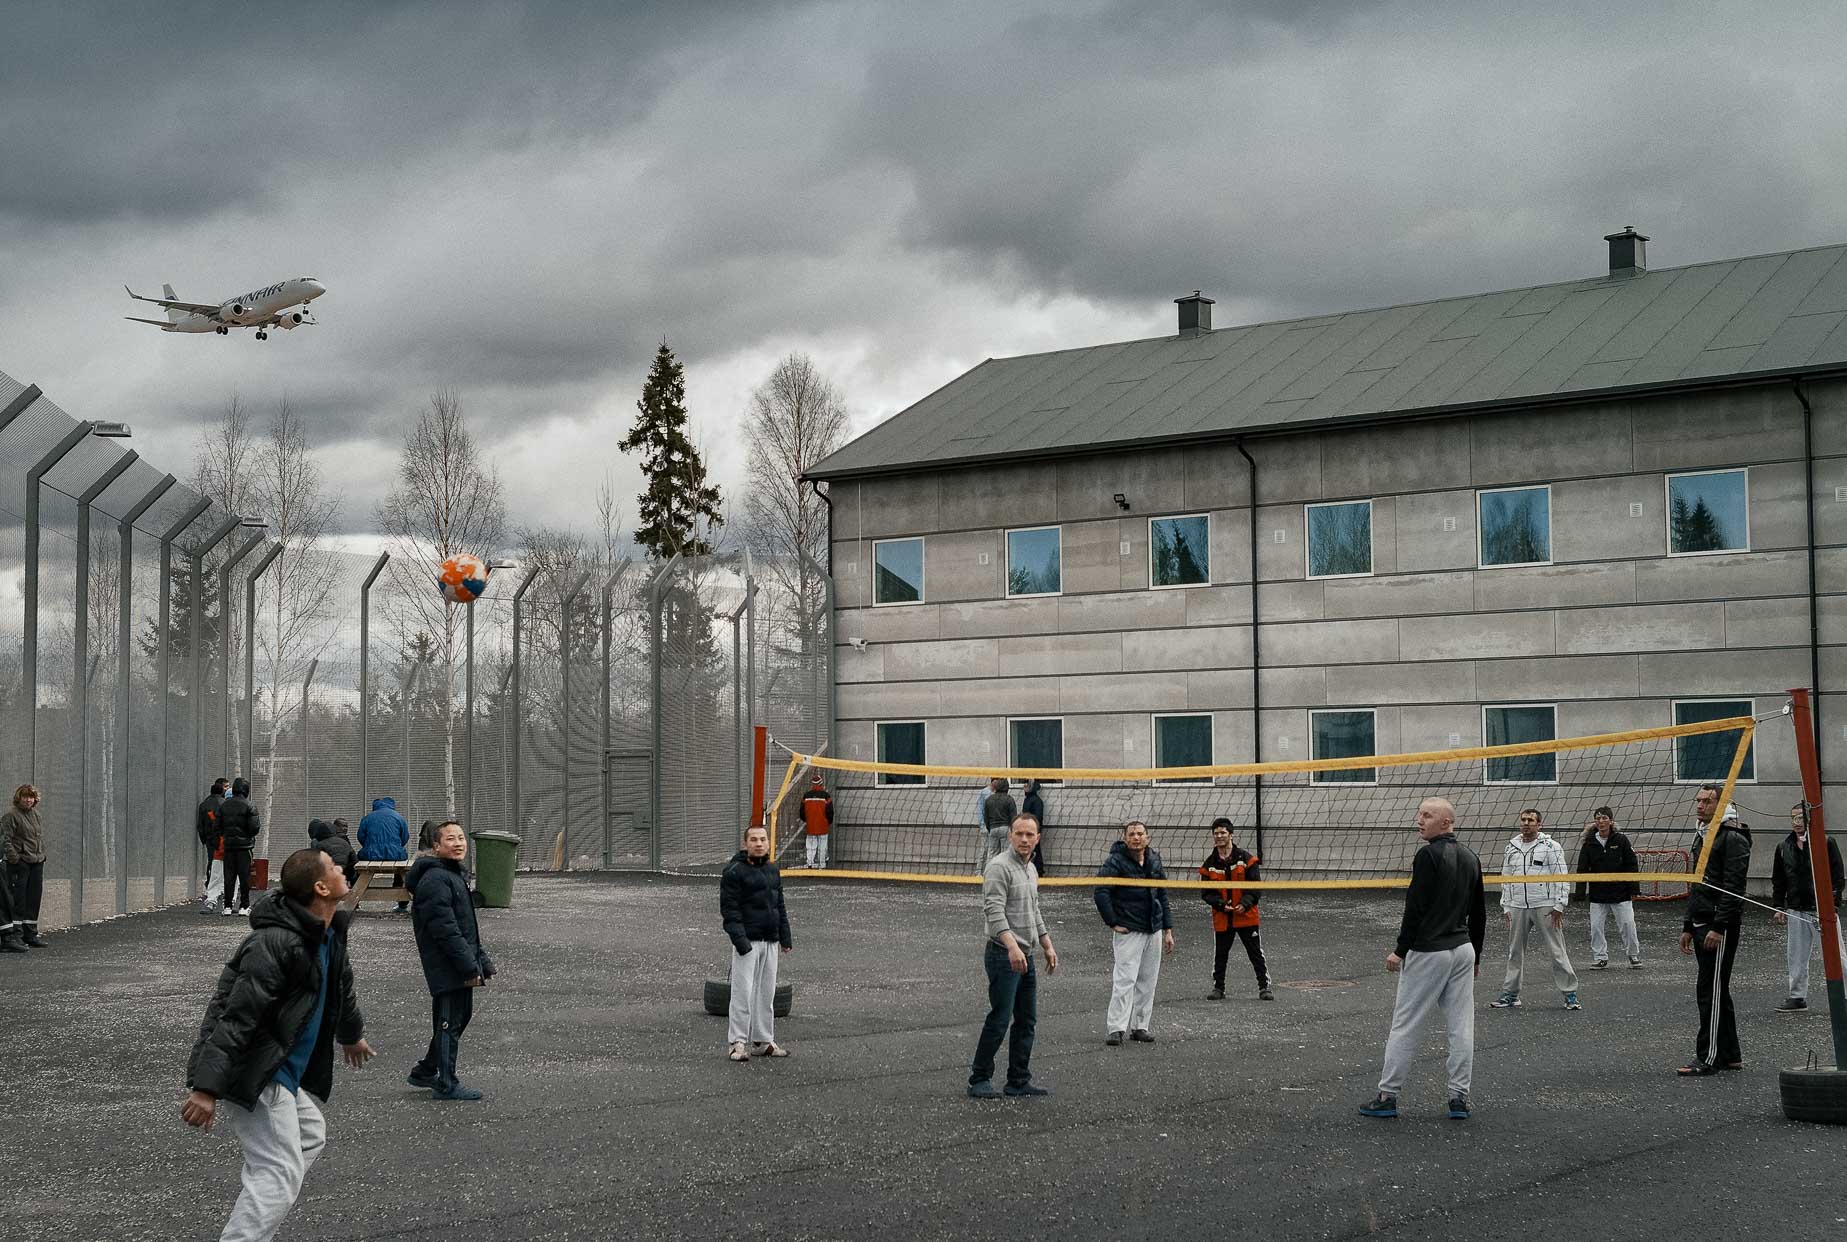  ILJA C. HENDEL FOTOGRAF |Feature photography about immigration procedures in Norway